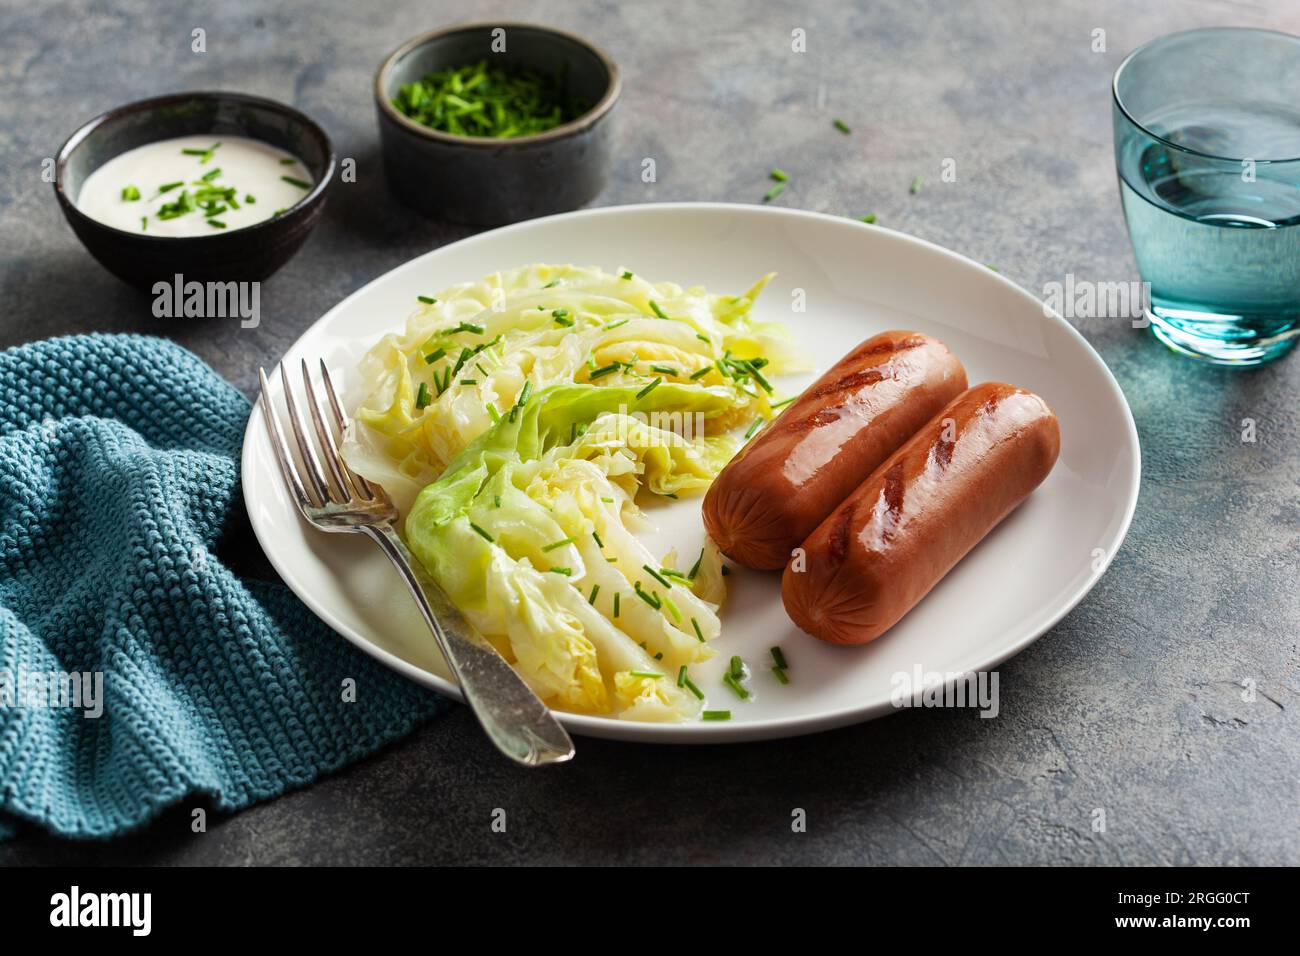 grilled sausages and stewed steamed cabbage with butter, healthy keto meal Stock Photo